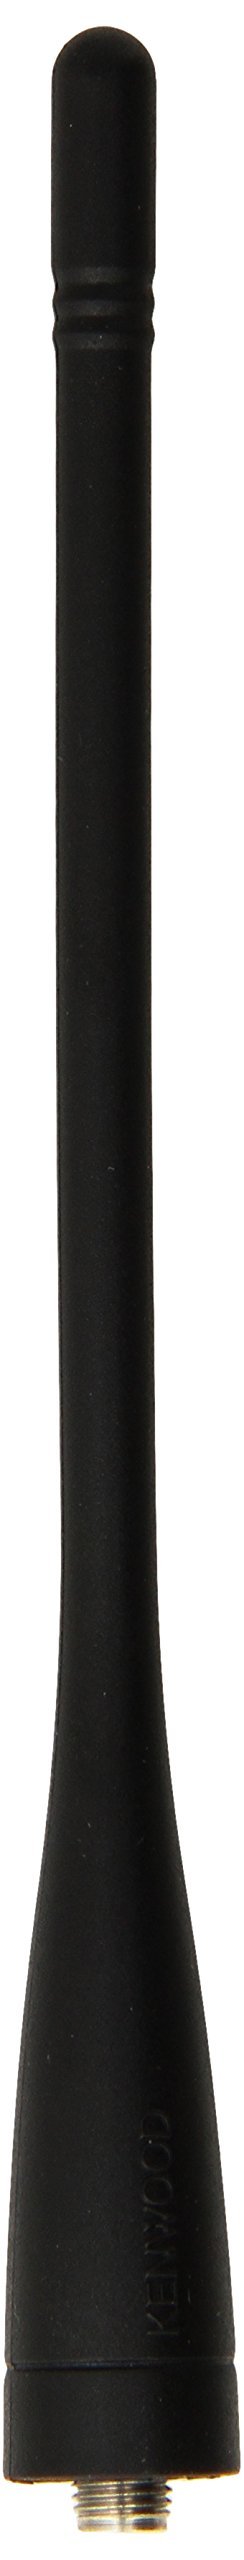 Kenwood KRA-27M UHF Whip Replacement Antenna for Two-Way Wireless Radios, OEM Accessory, 440-490 MHz Frequency Range, Standard SMA (F) Connector, Indoor/Outdoor Signal Reception, Water-Dust Resistant